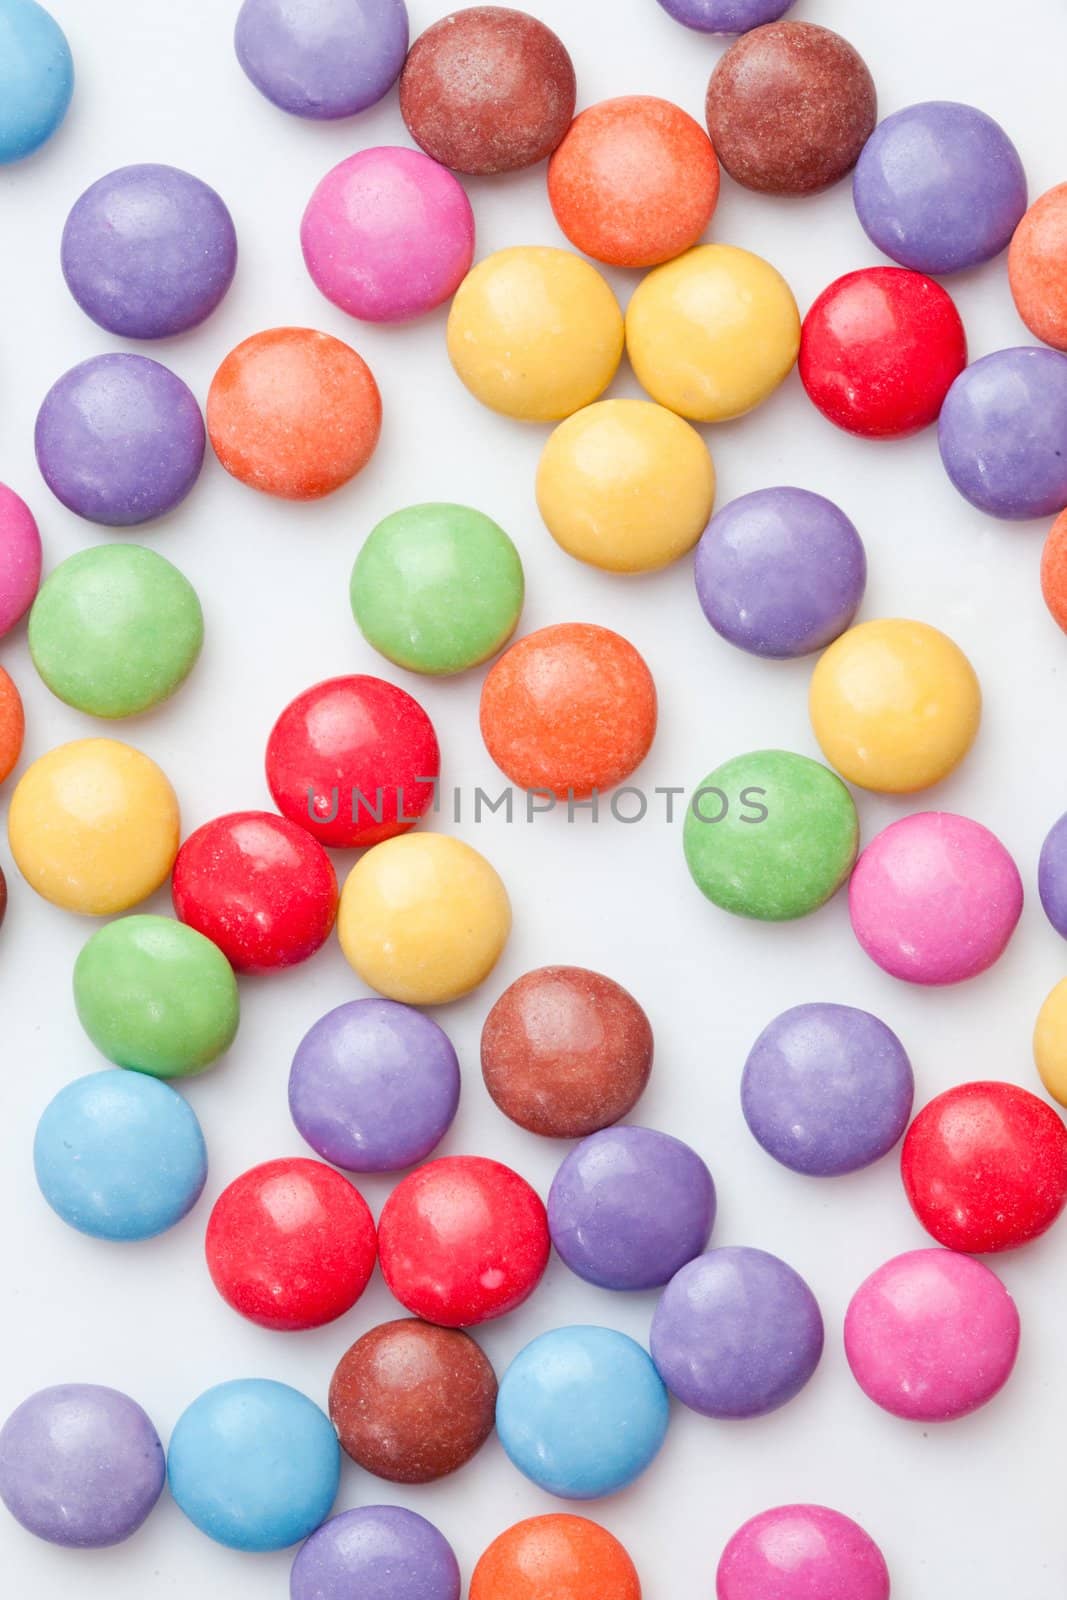 Chocolate candies multi coloured against a white background